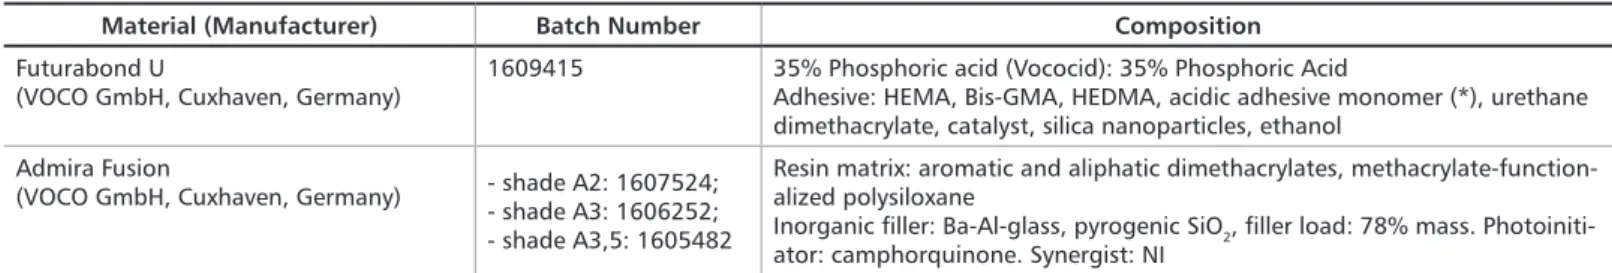 Table 1. Composition and batch number of materials used in the restorative procedures